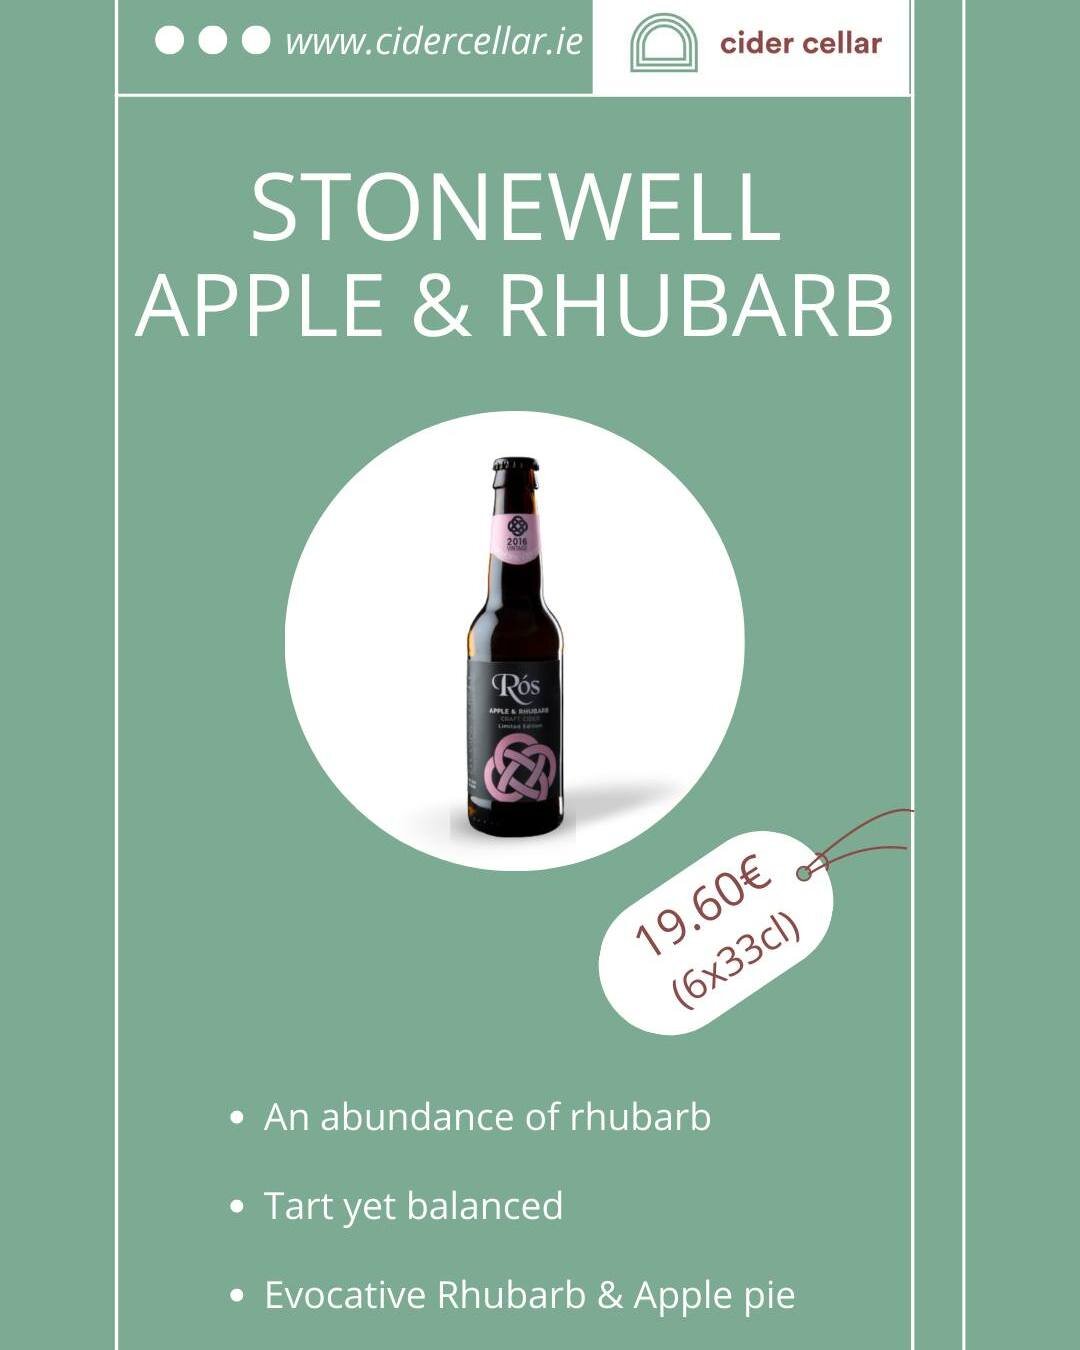 Check out our Stonewell Cider range on cidercellar.ie.